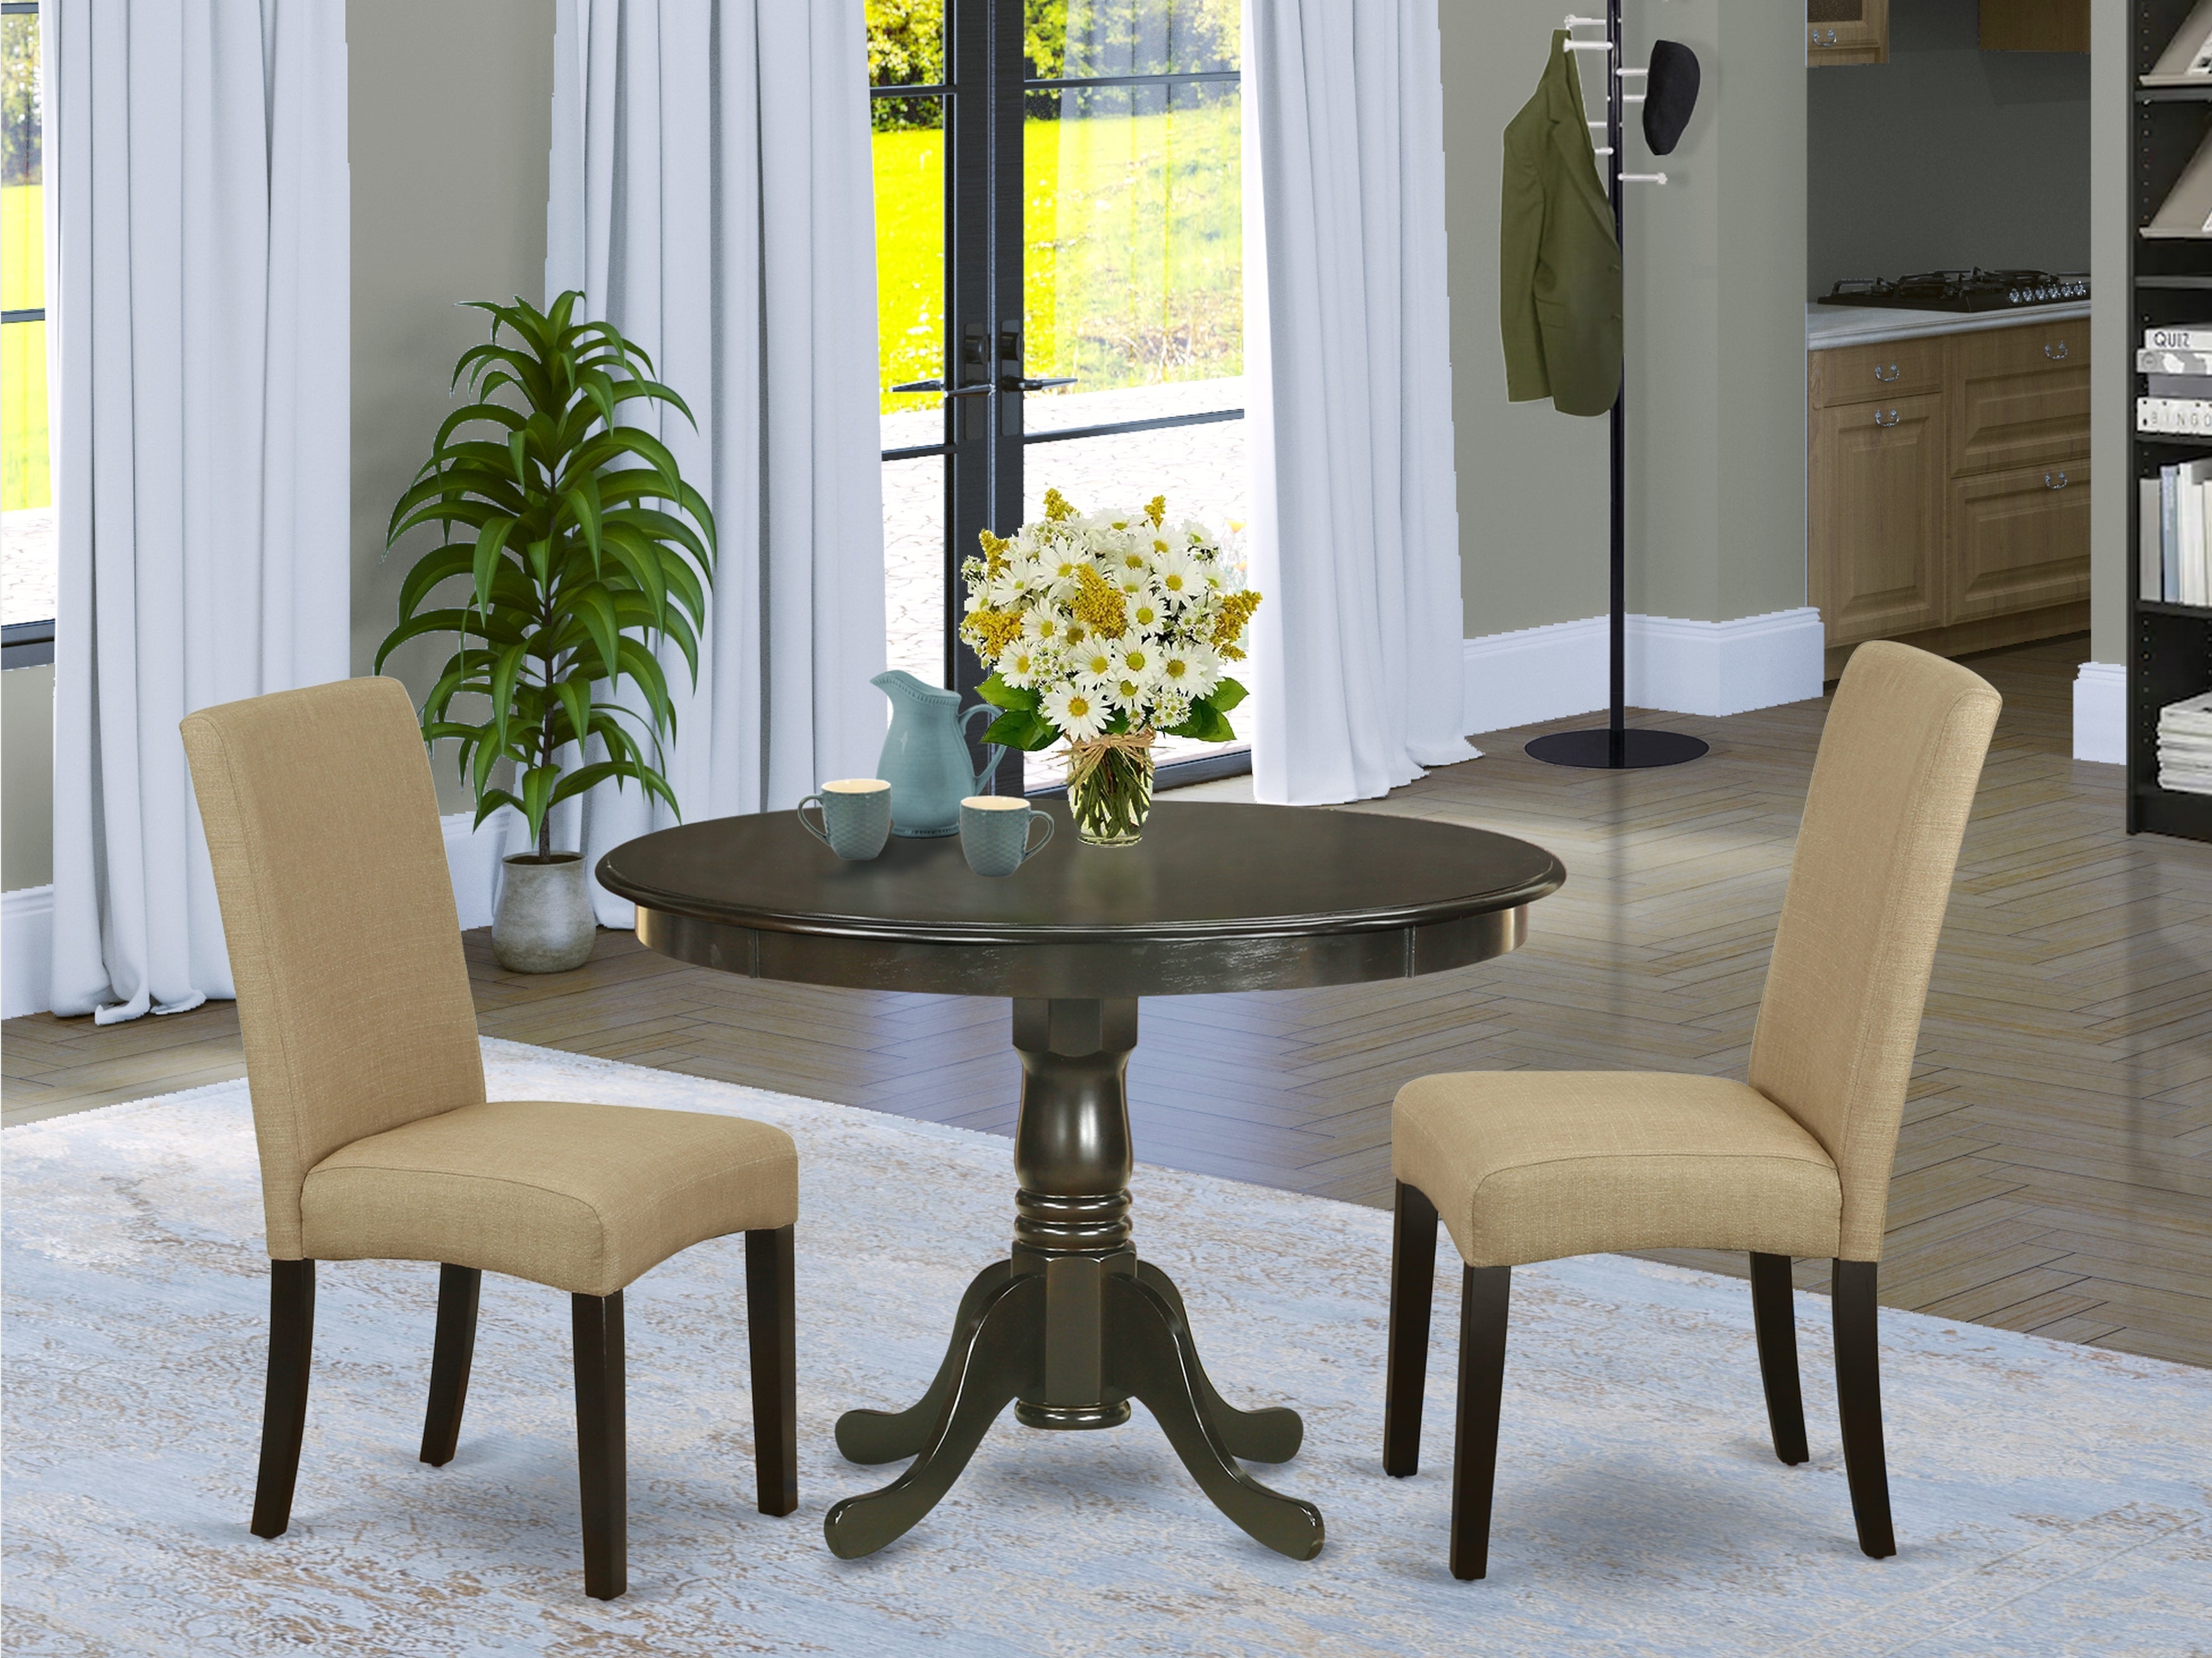 HLDR3-CAP-03 3Pc Round 42" Dining Table And Two Parson Chair With Cappuccino Finish Leg And Linen Fabric- Brown Color